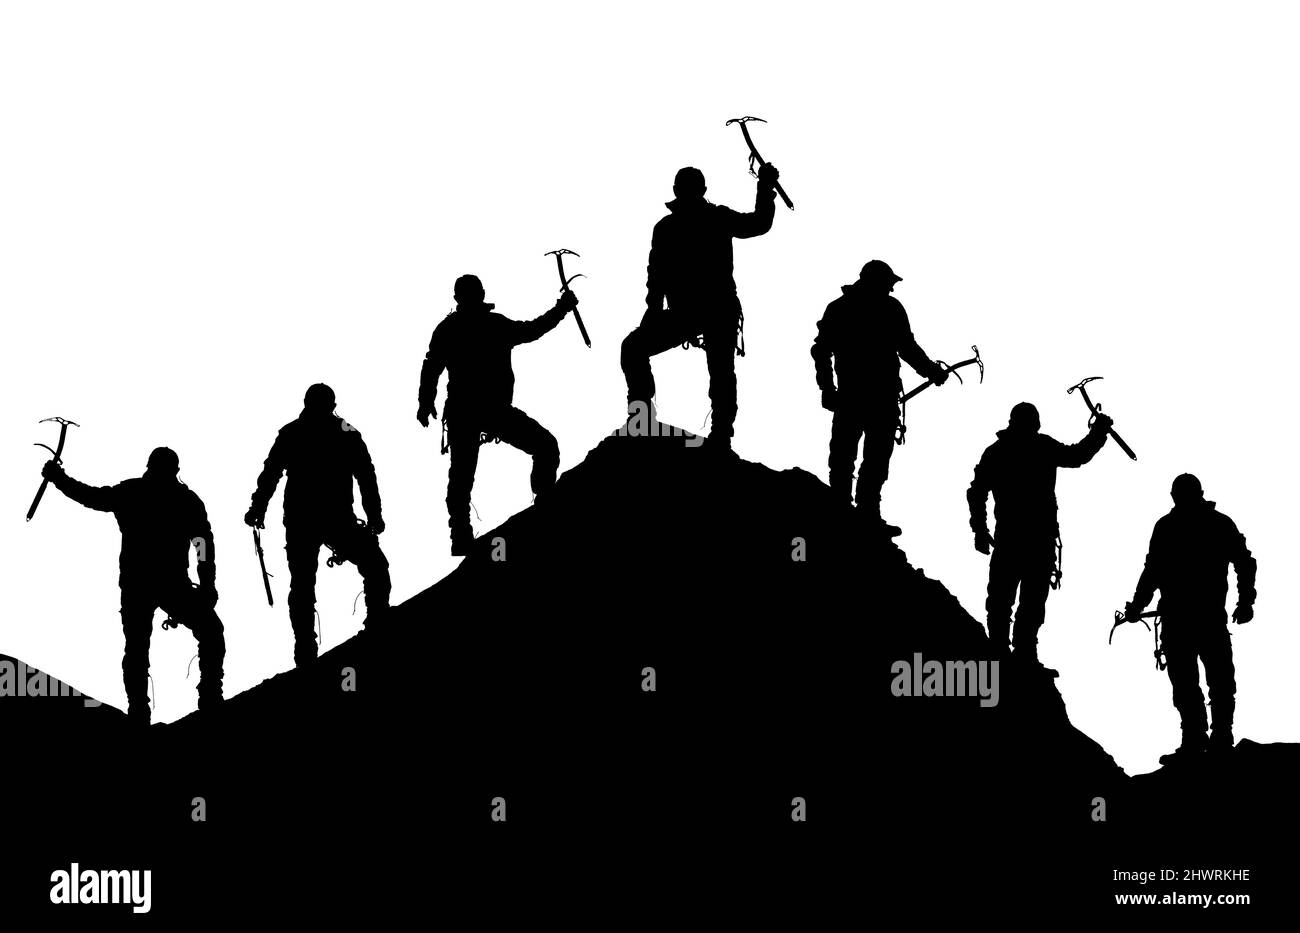 silhouette of seven climbers with ice axe in hand on top of Mount Everest silhouette, black and white mountain vector illustration logo Stock Photo